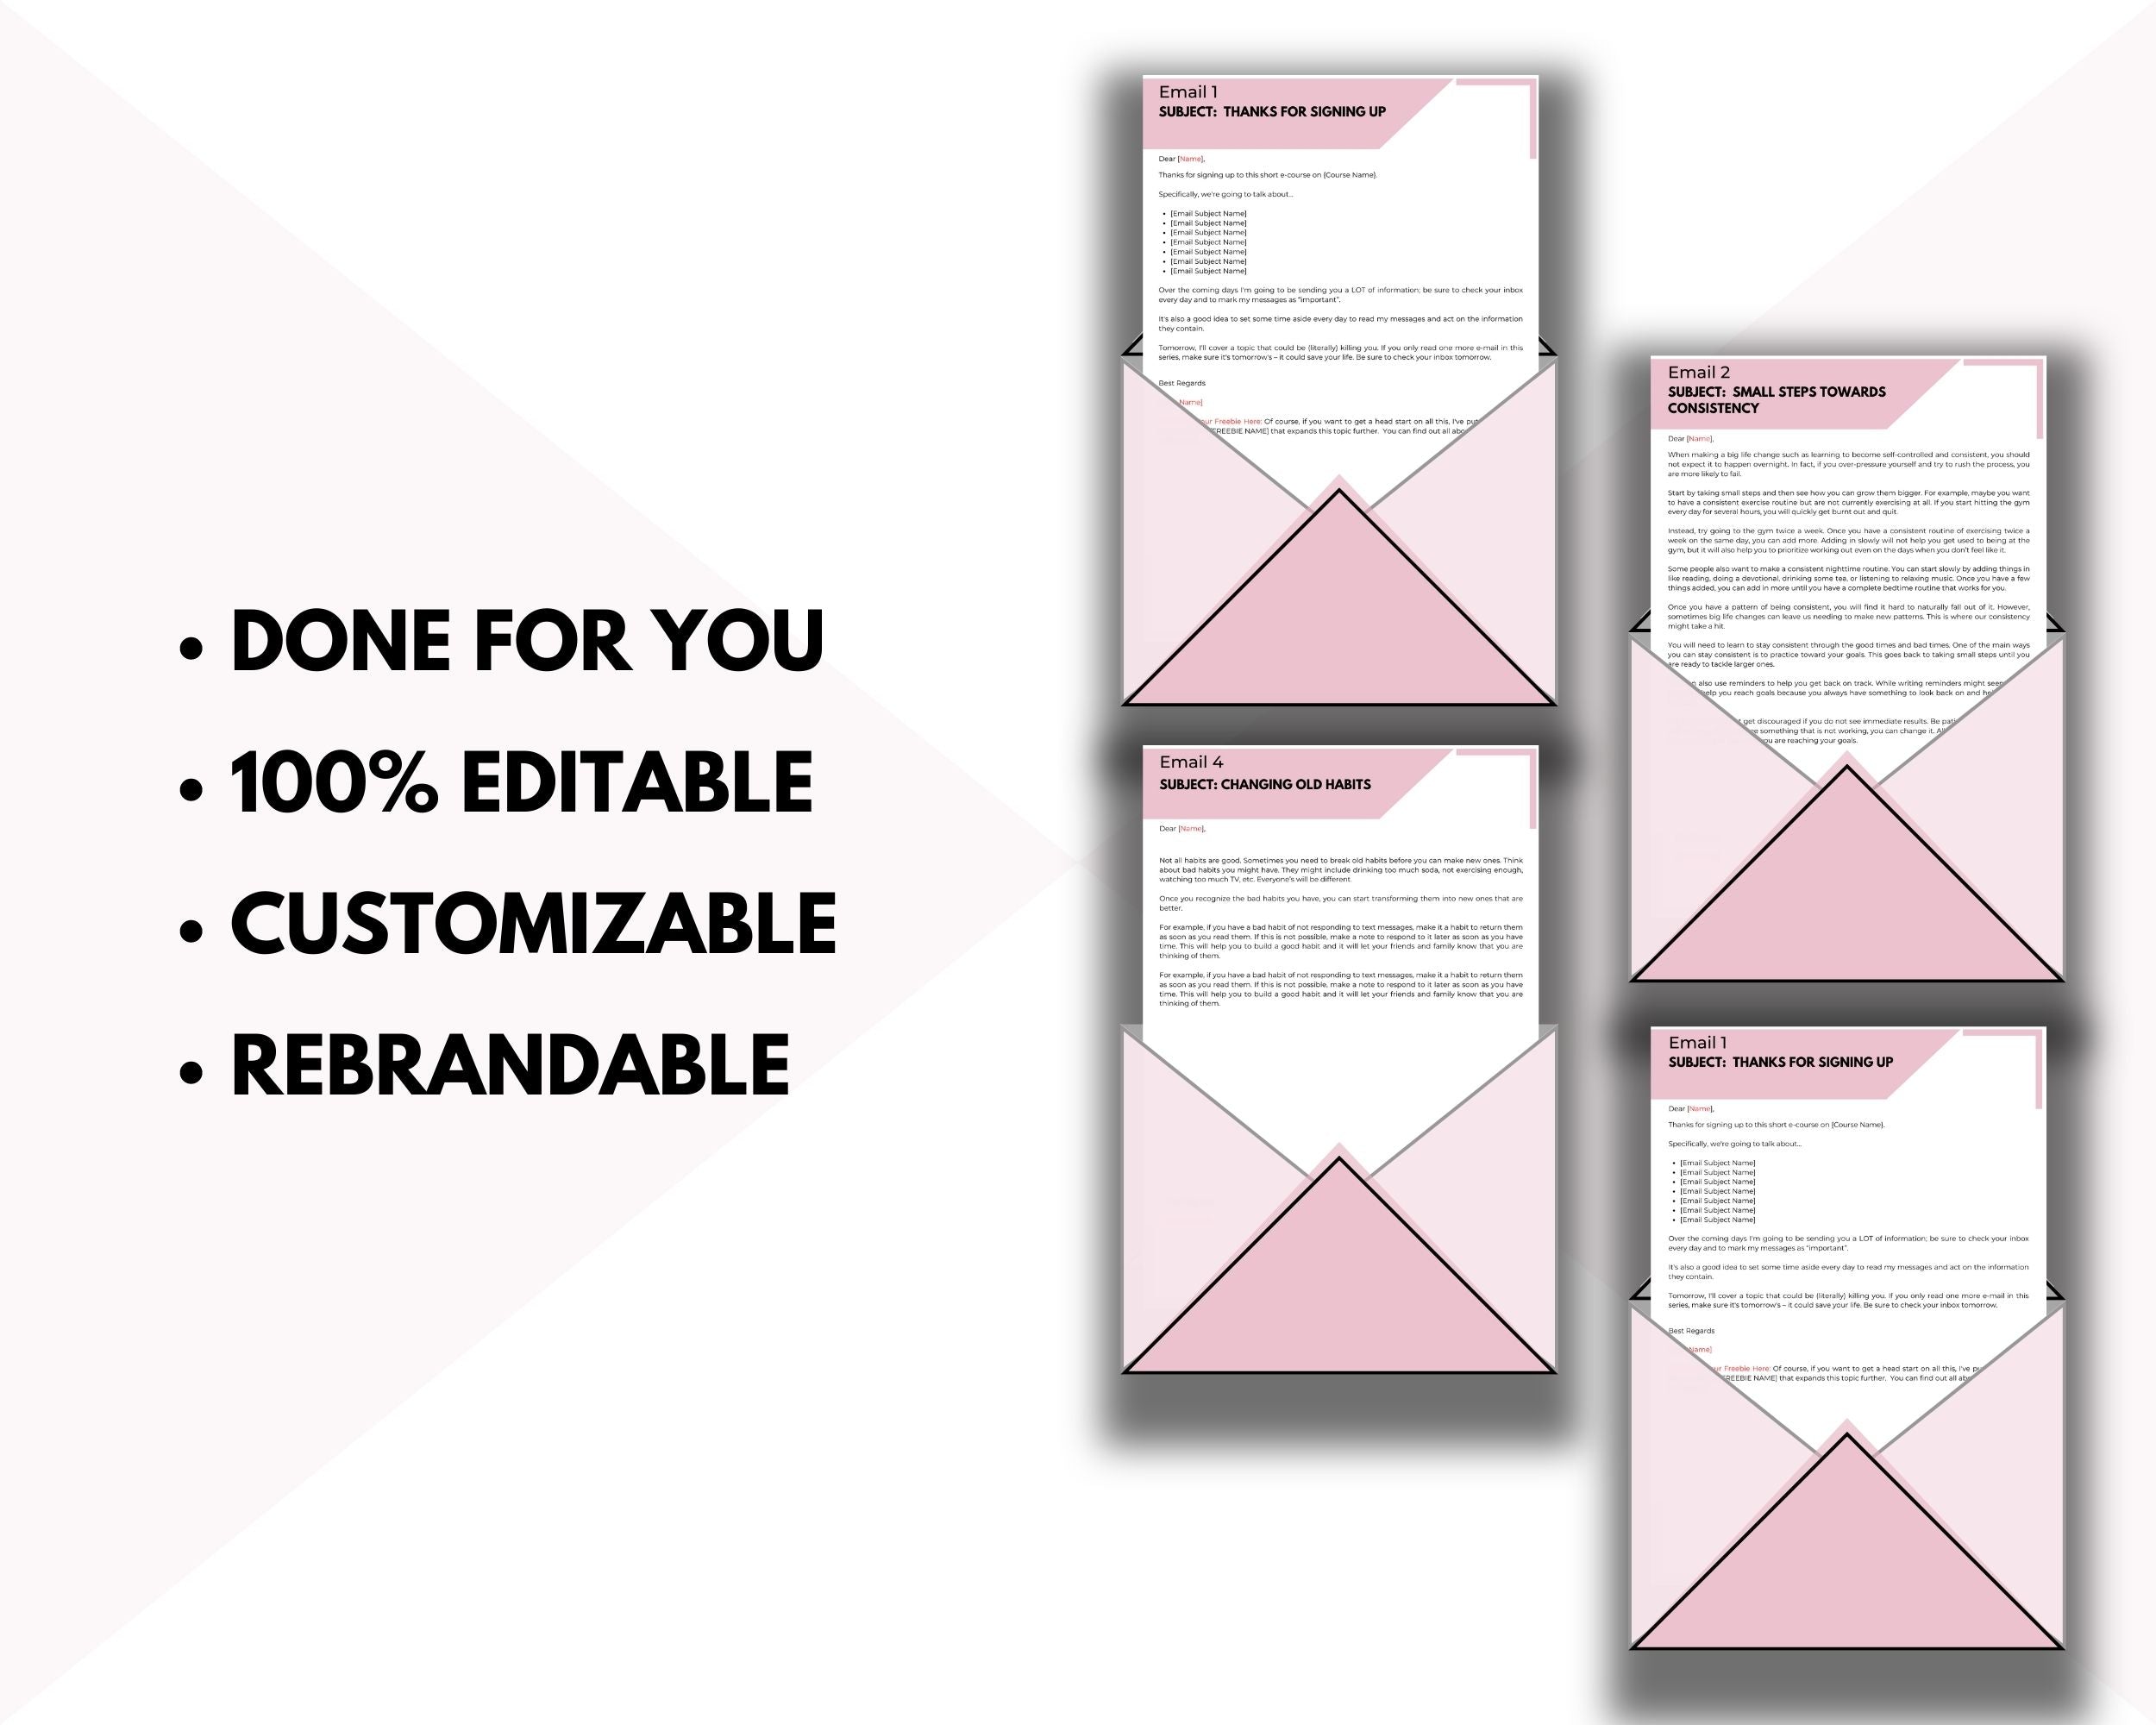 Editable 5 Things Successful People Do to Stay Consistent Emails | Email eCourse Template